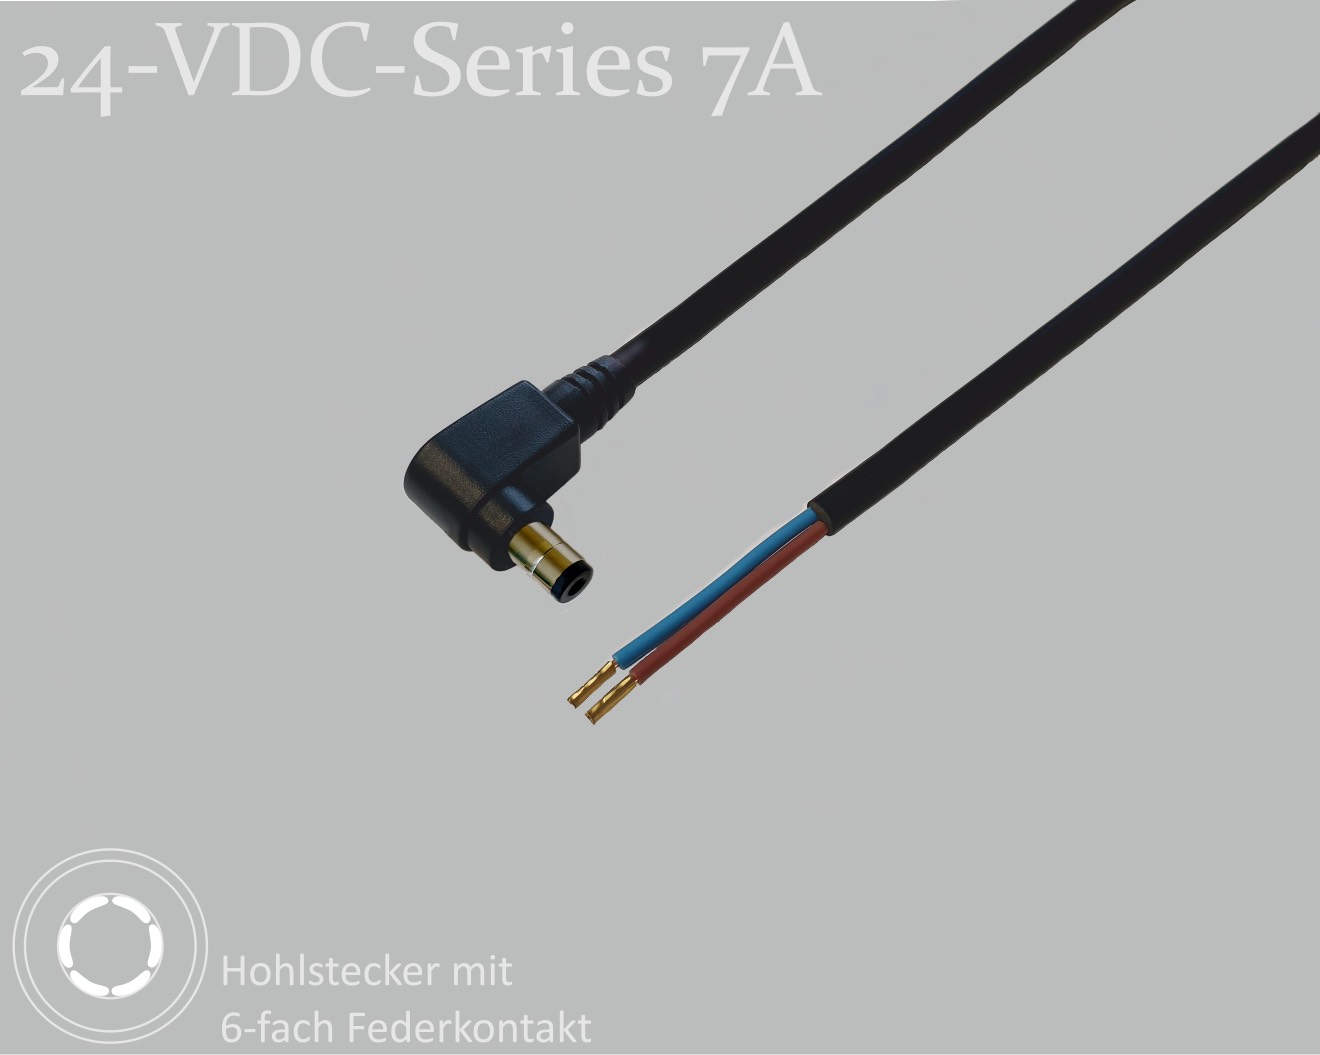 24-VDC-Series 7A, DC connection cable, DC right-angle plug with 6-spring contact 2.5x5.5x9.5mm, round cable 2x0.50mm², black, wire end sleeves, 1.5m